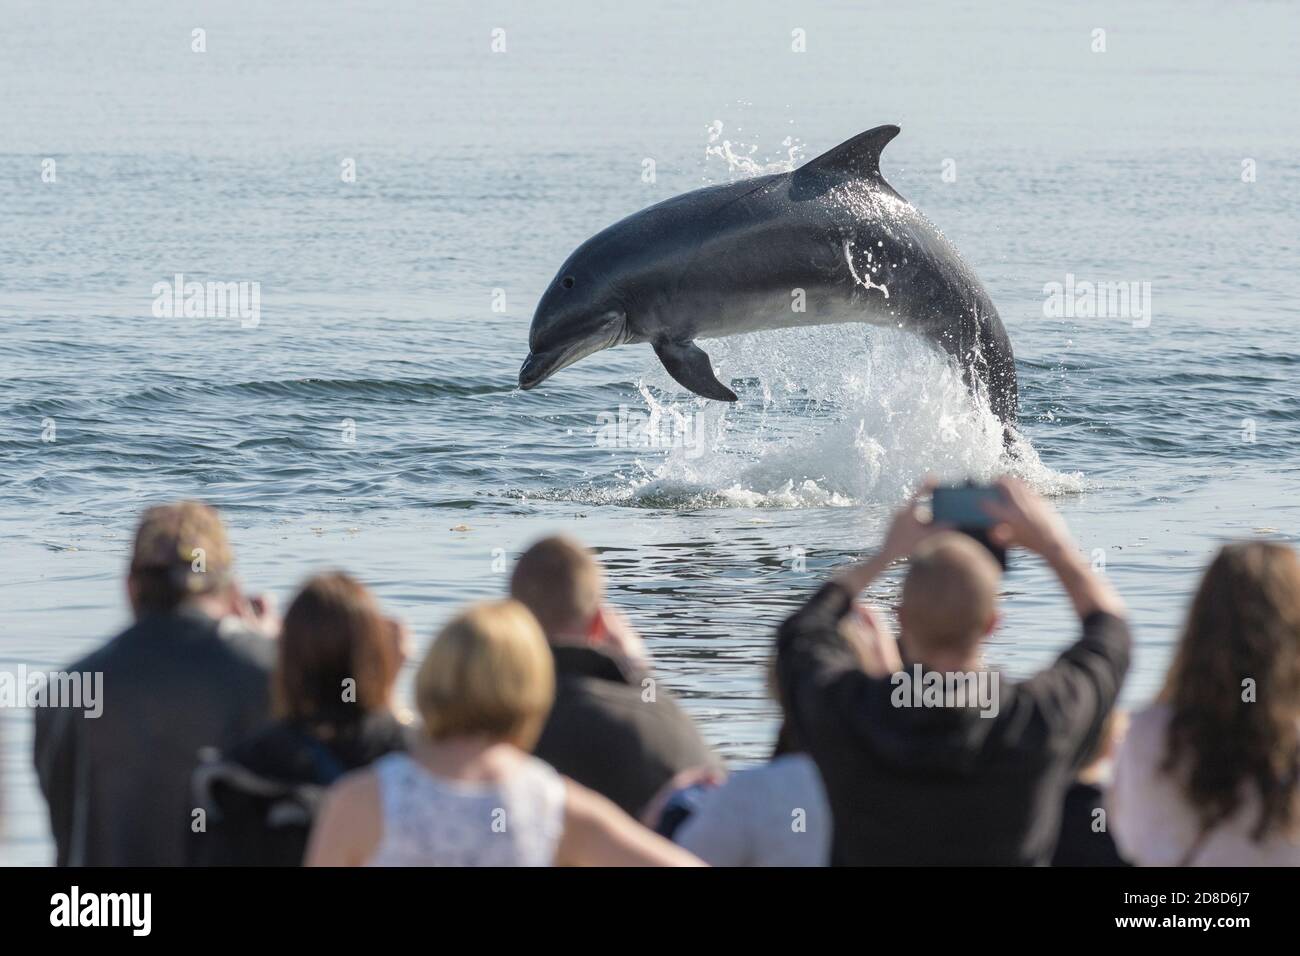 People watching Bottlenose dolphin (Tursiops truncatus) from the beach, Chanonry Point, Moray Firth, Highlands, Scotland. August 2017. Stock Photo